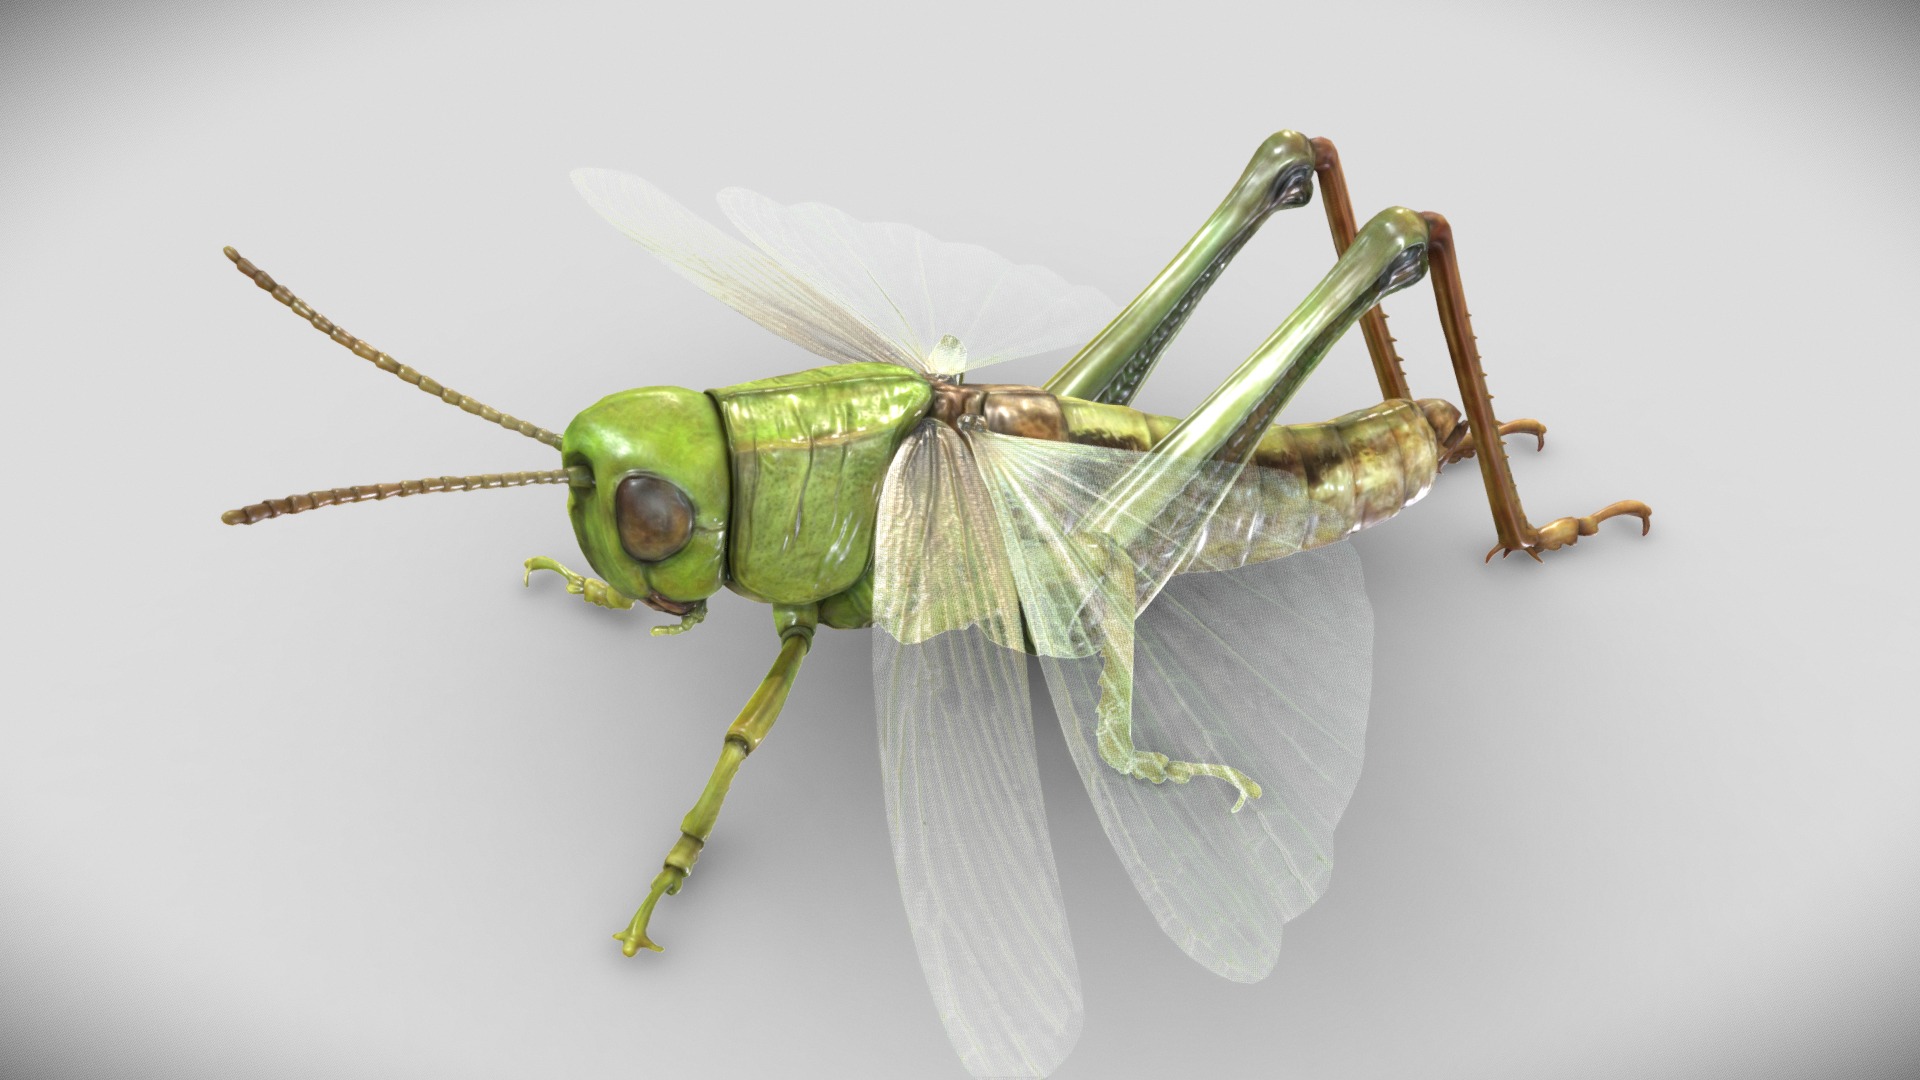 3D model Grasshopper - This is a 3D model of the Grasshopper. The 3D model is about a green insect with wings.